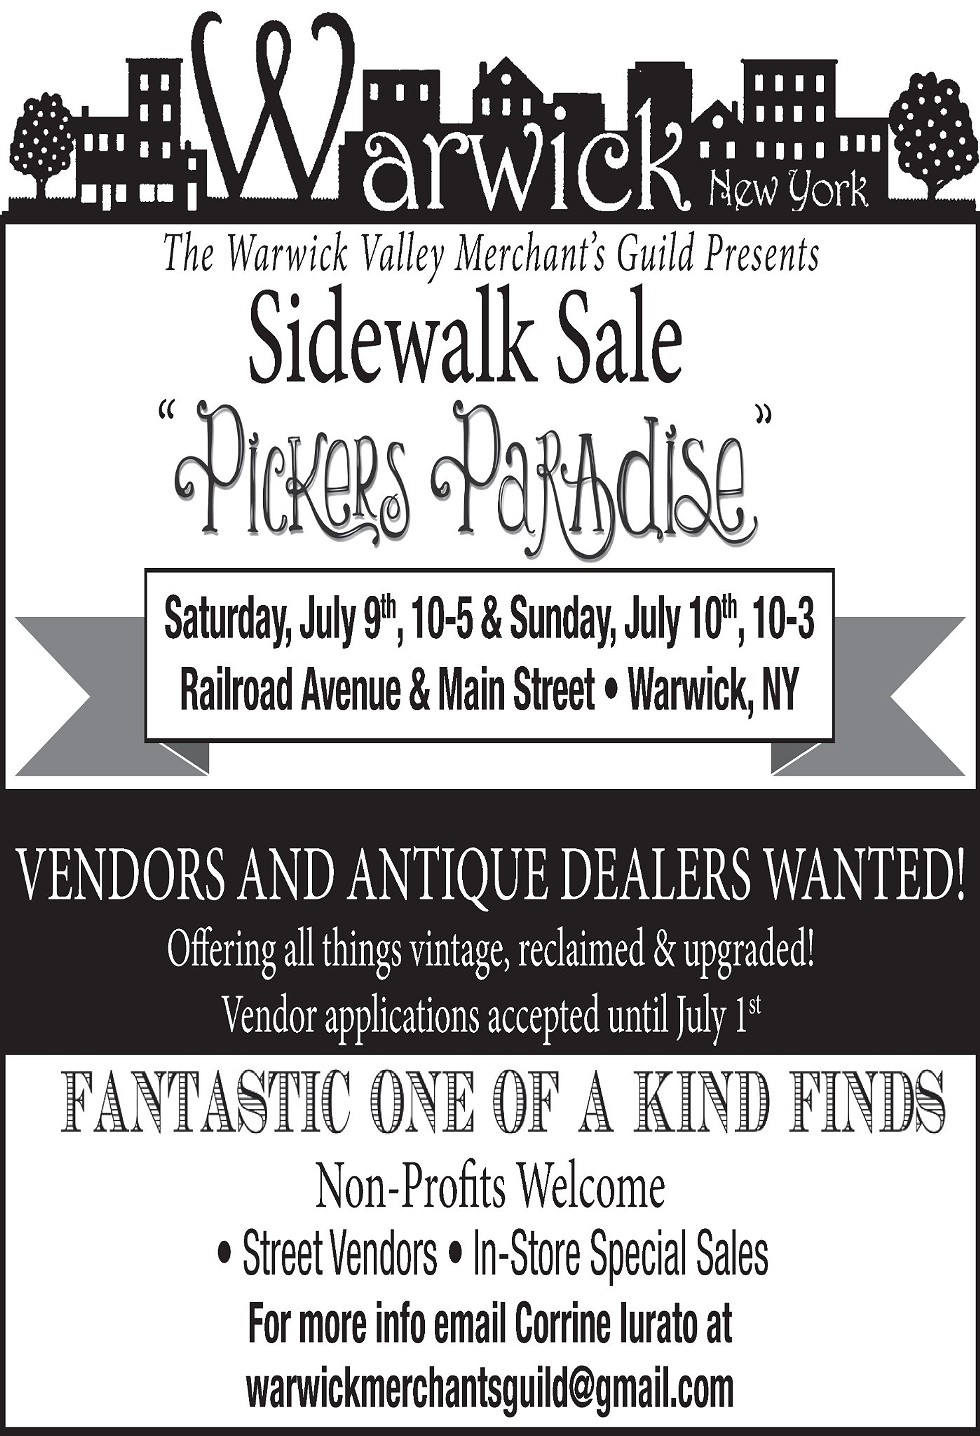 Our annual Pickers Paradise Sidewalk Sale! Join us for a great weekend!